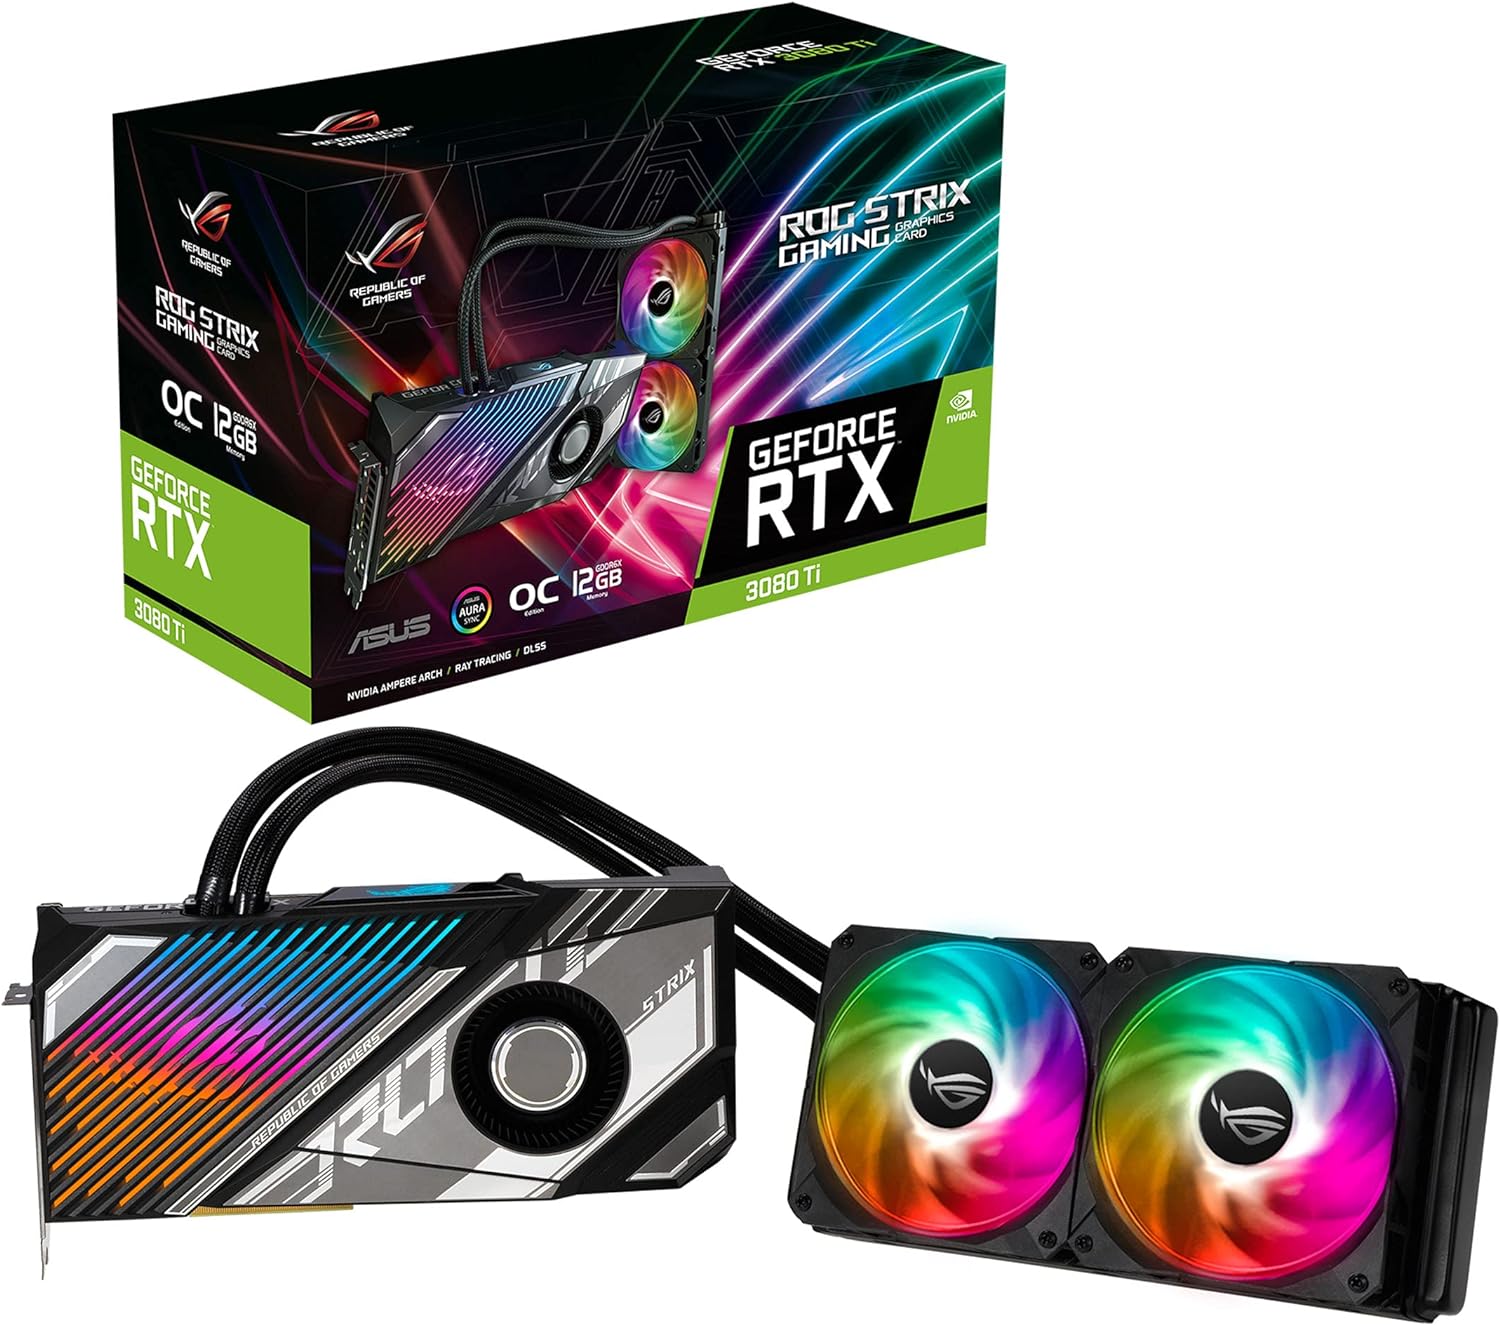 ASUS ROG Strix LC RTX 3080 Ti OC Gaming Card: Liquid-cooled powerhouse with 12GB GDDR6X memory. 0195553220835